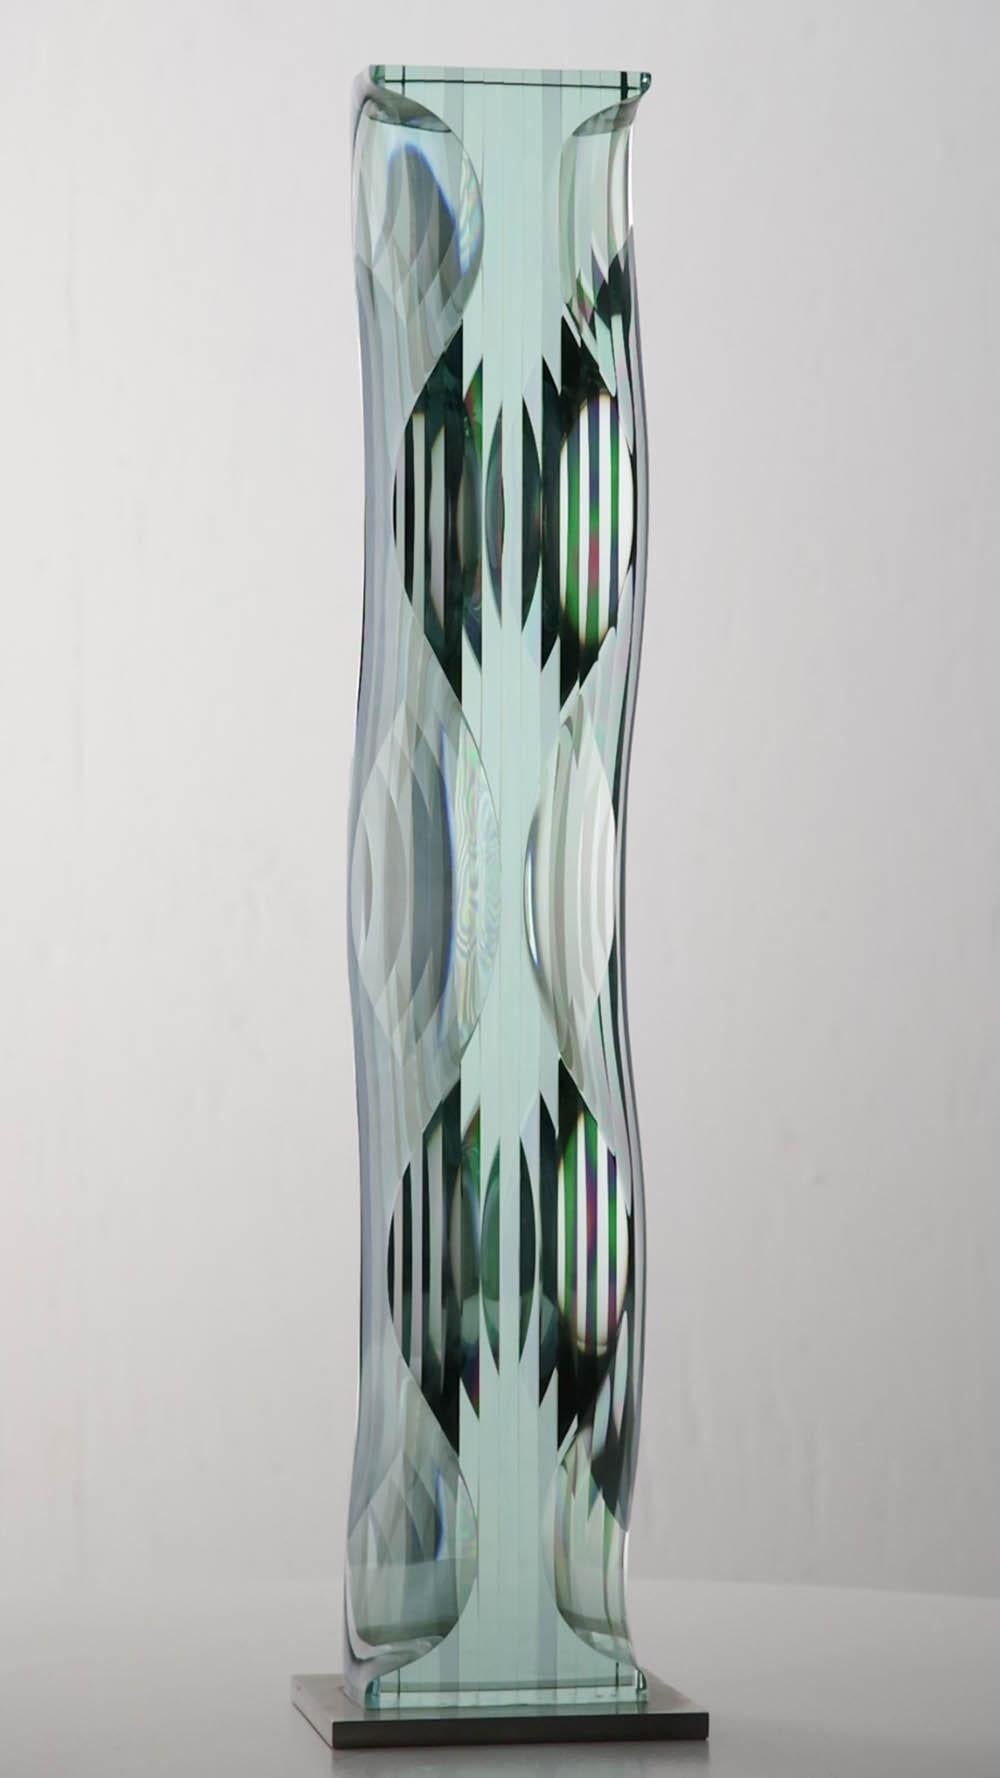 M.180603 by Toshio Iezumi - Contemporary glass sculpture, green, abstract For Sale 4